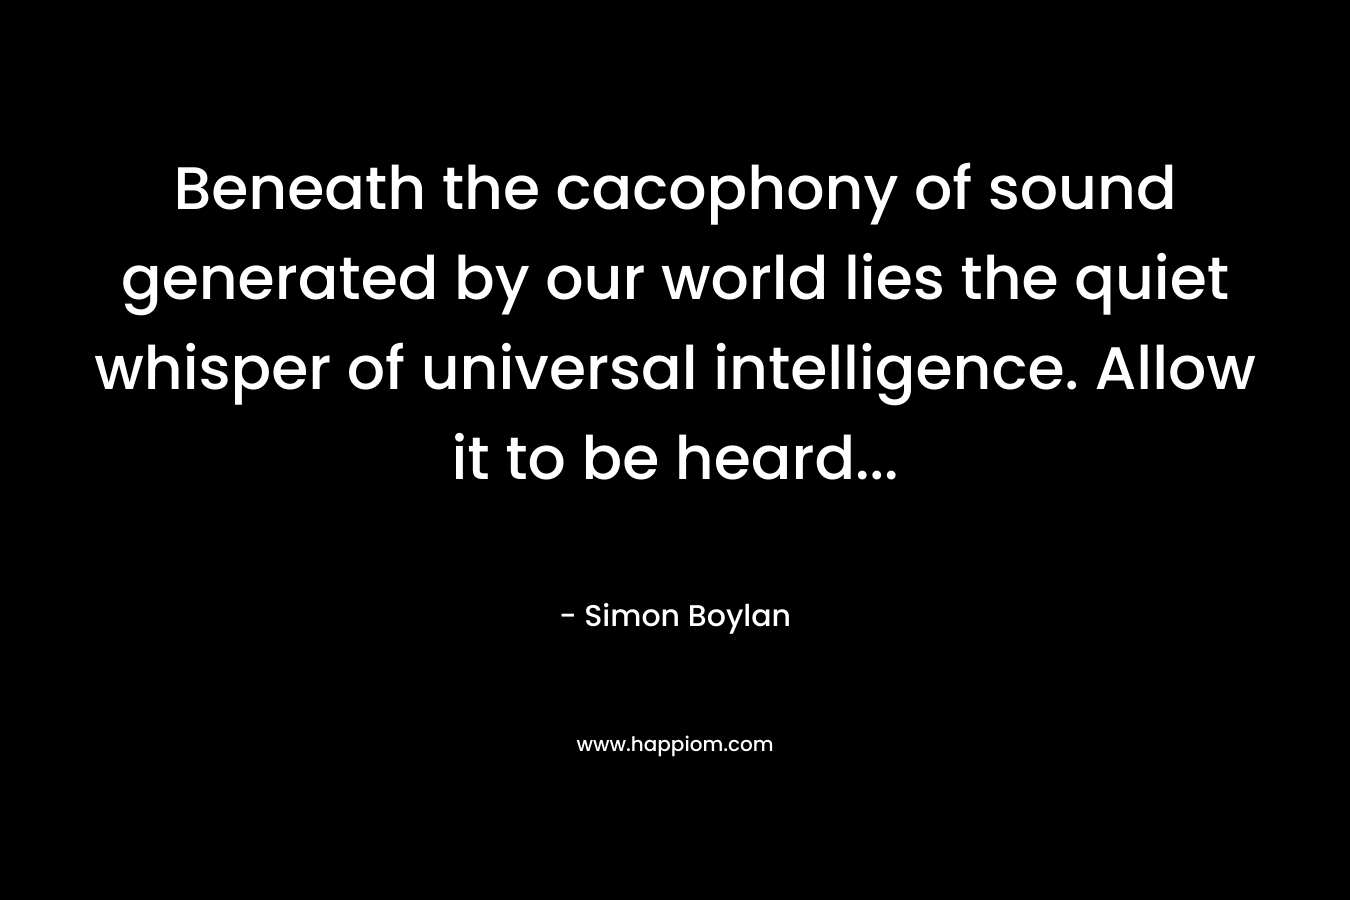 Beneath the cacophony of sound generated by our world lies the quiet whisper of universal intelligence. Allow it to be heard… – Simon Boylan